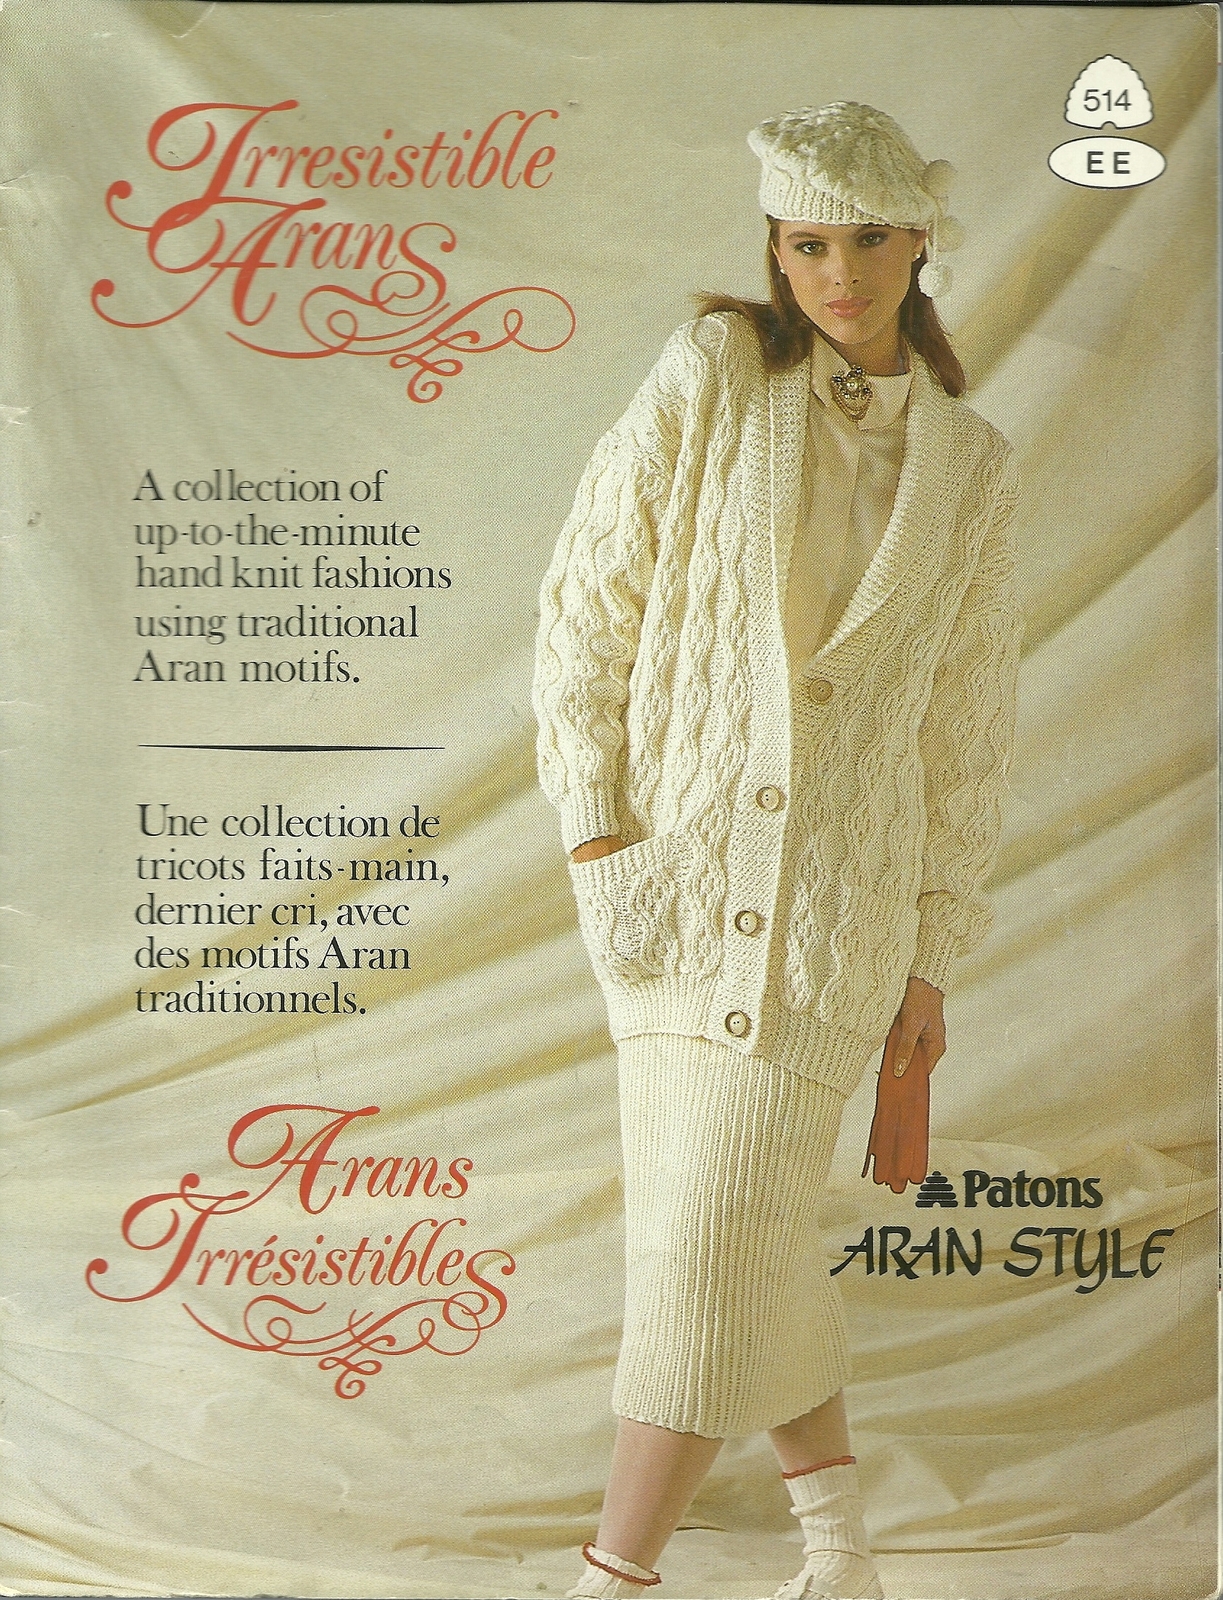 Irresistible Arans Patons 514 Pattern Book Knitted Mens Womens Fashions - $6.99